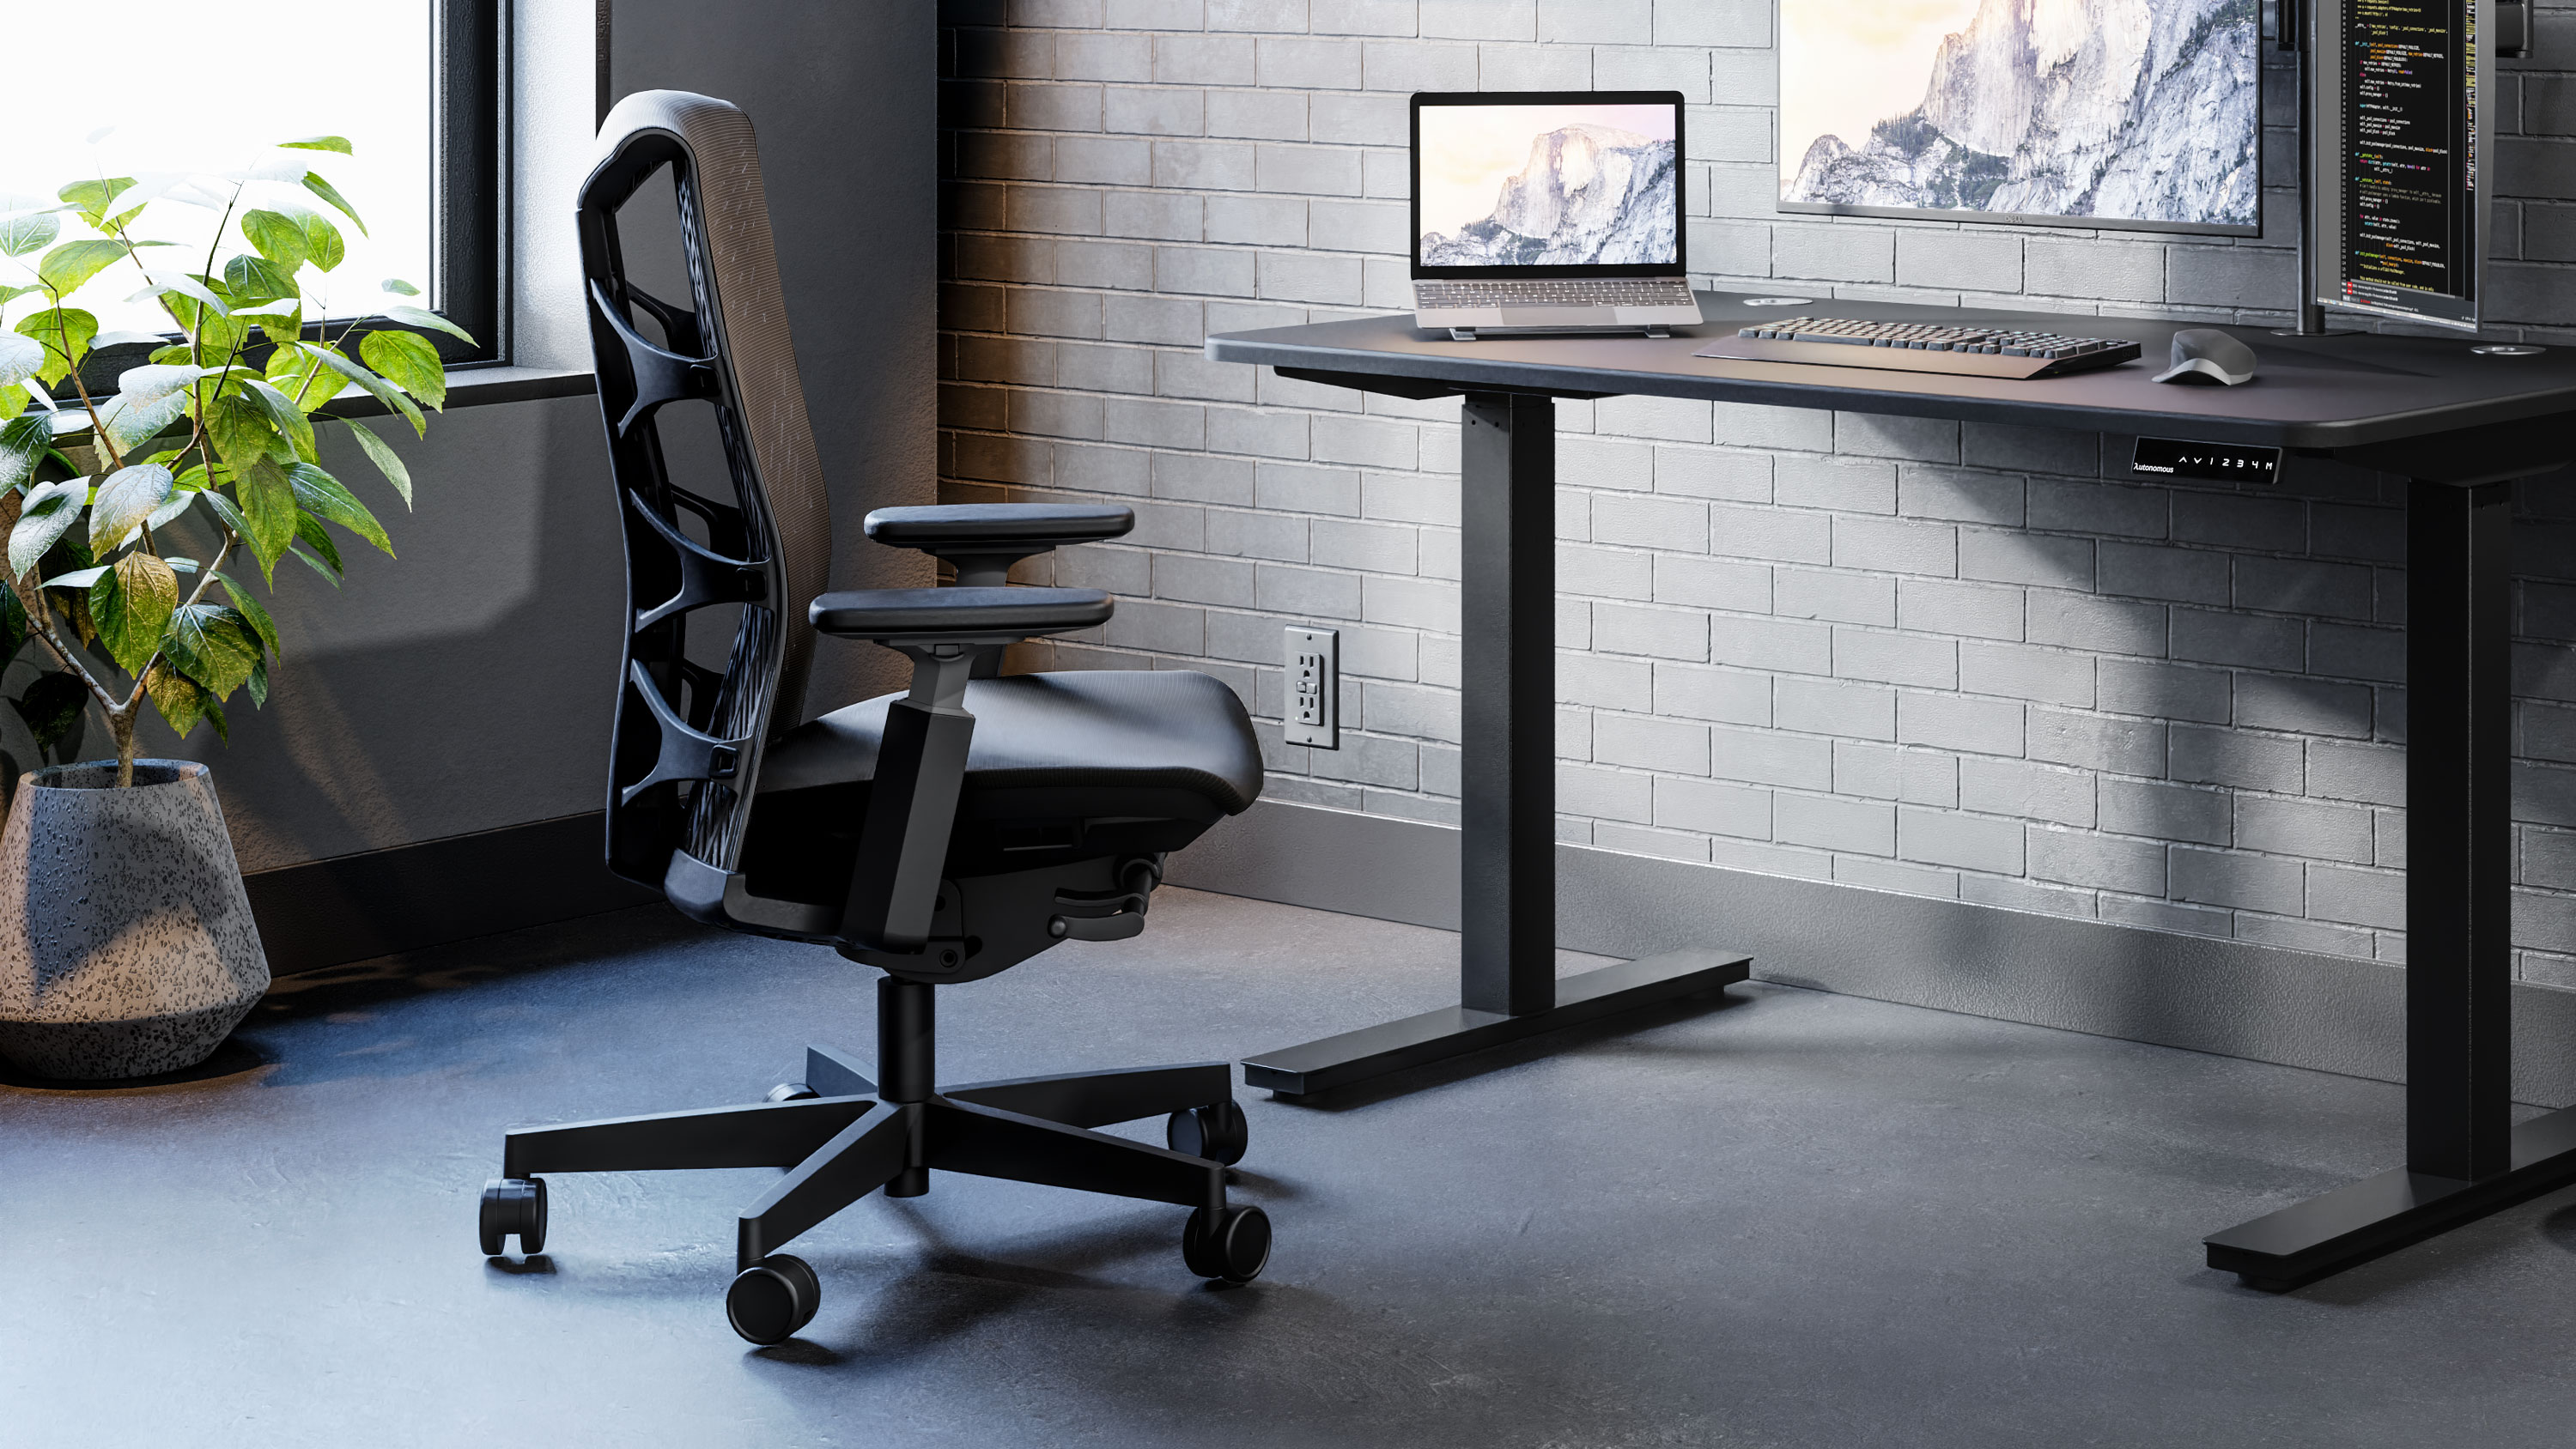 ErgoChair Pro+ | The Best Ergonomic Chair to Move More and Feel Better